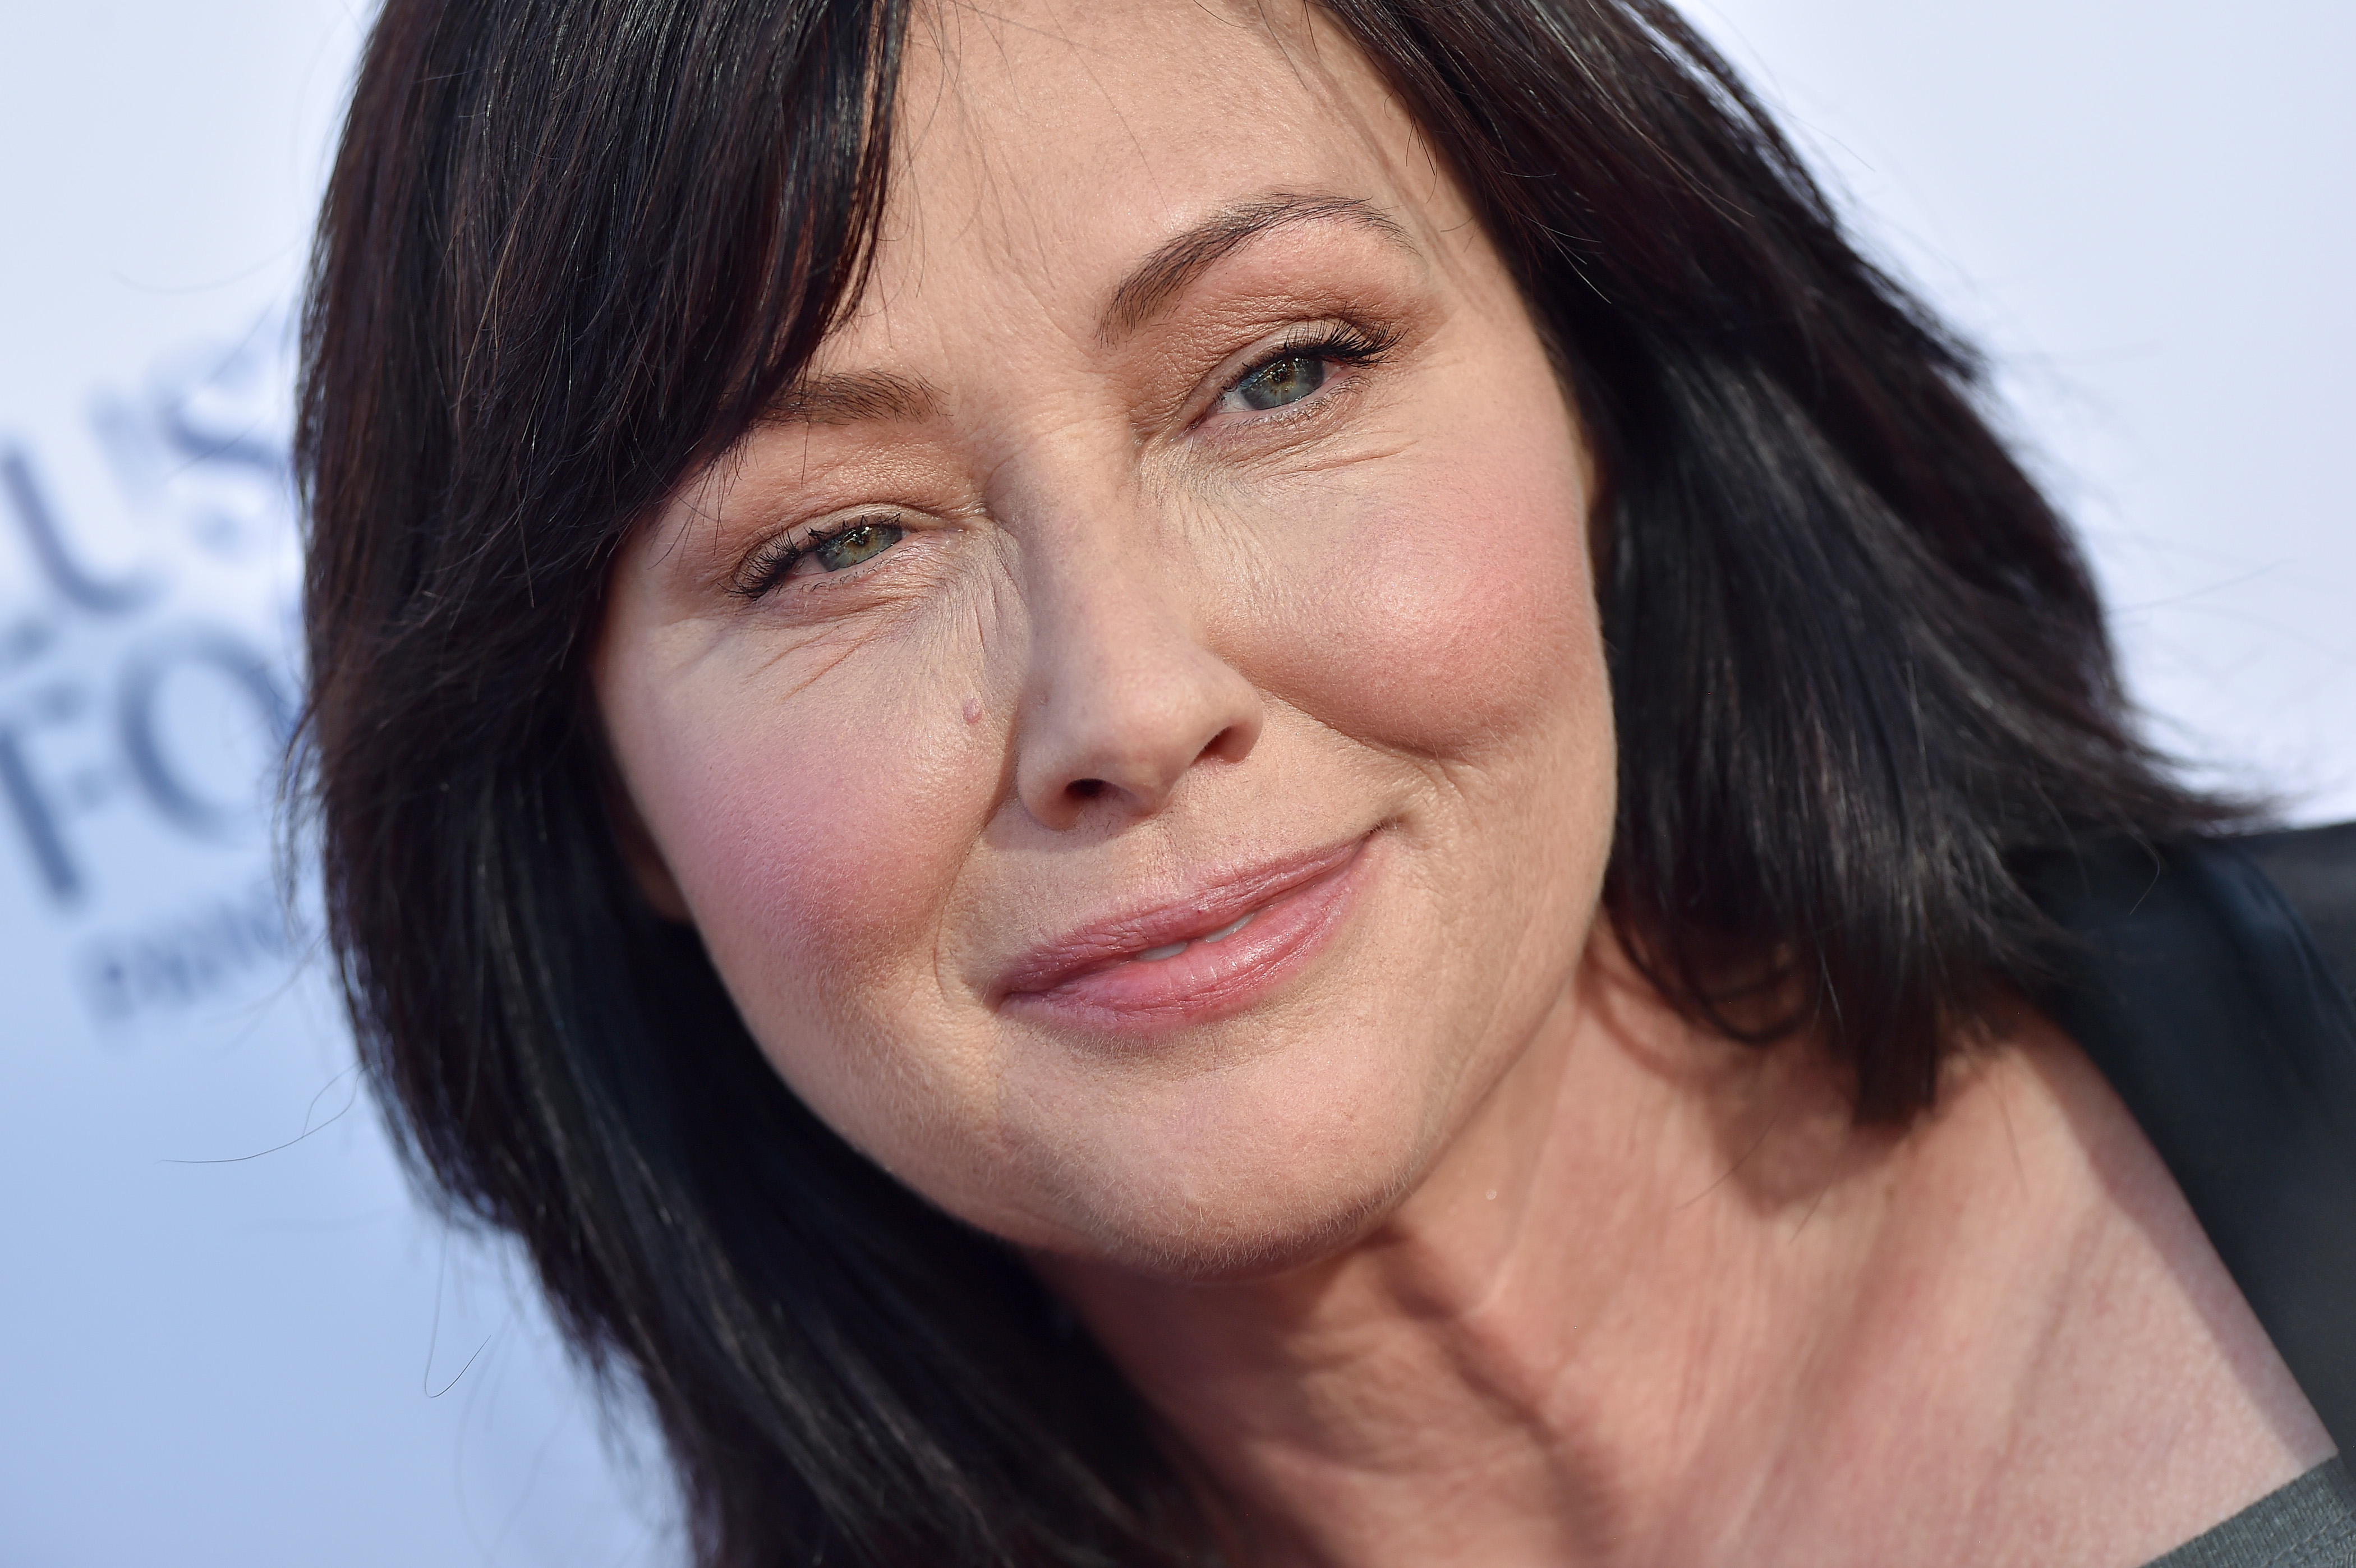 Shannen Doherty at the Stand Up to Cancer event in 2018 | Source: Getty Images